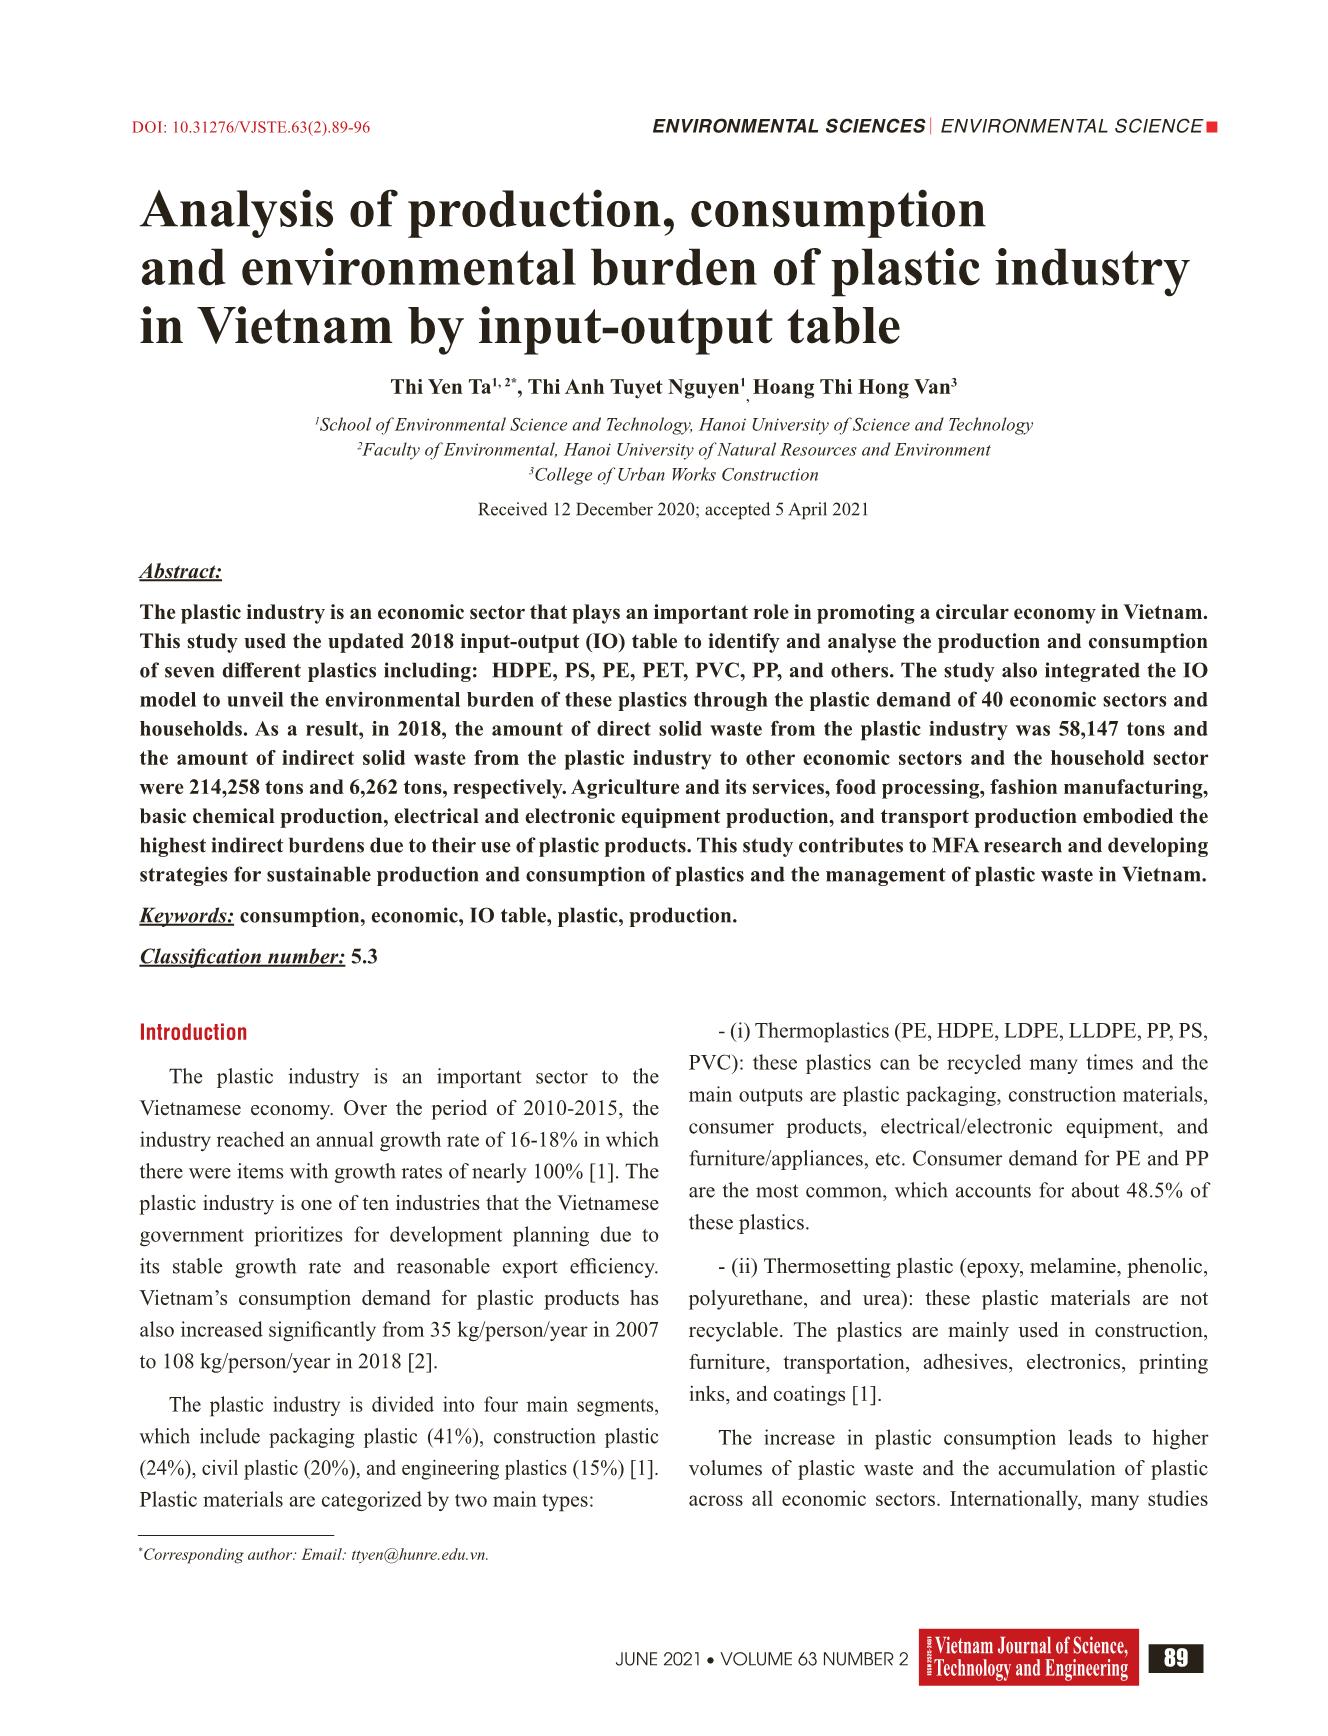 Analysis of production, consumption and environmental burden of plastic industry in Vietnam by input-Output table trang 1